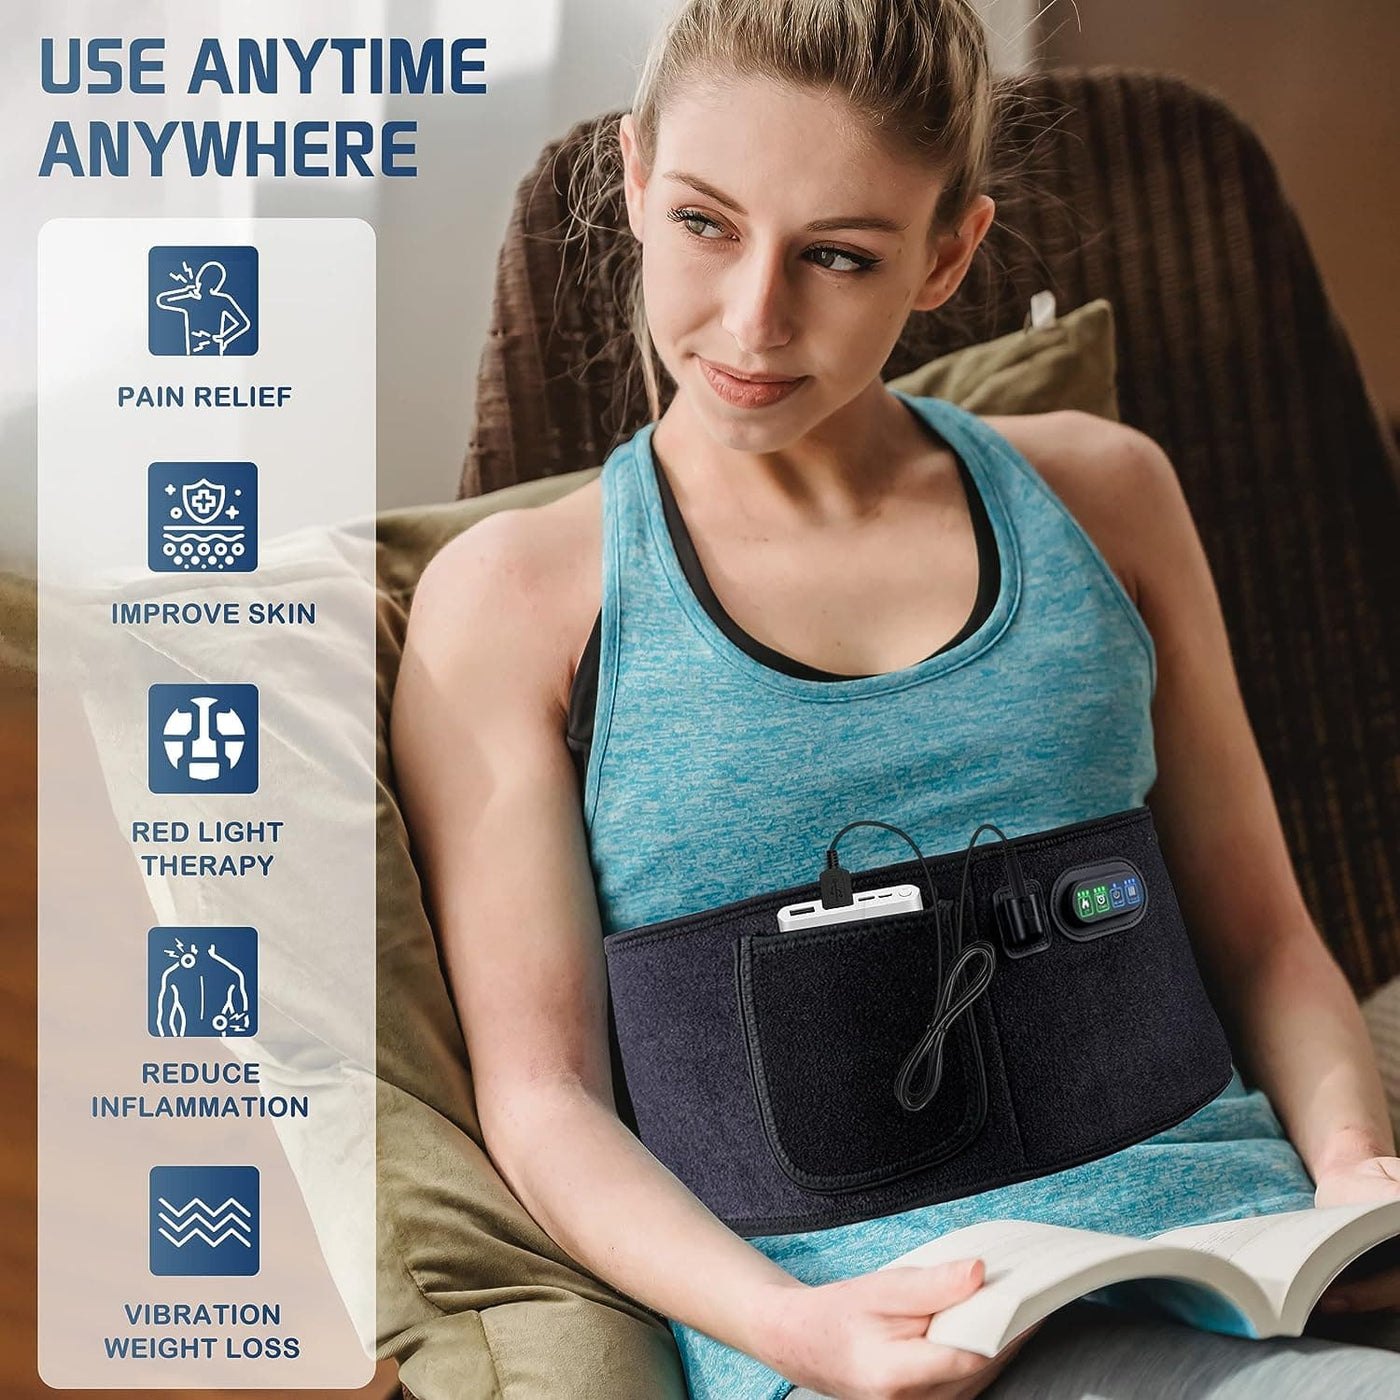 Infrared Light Therapy Belt benefits